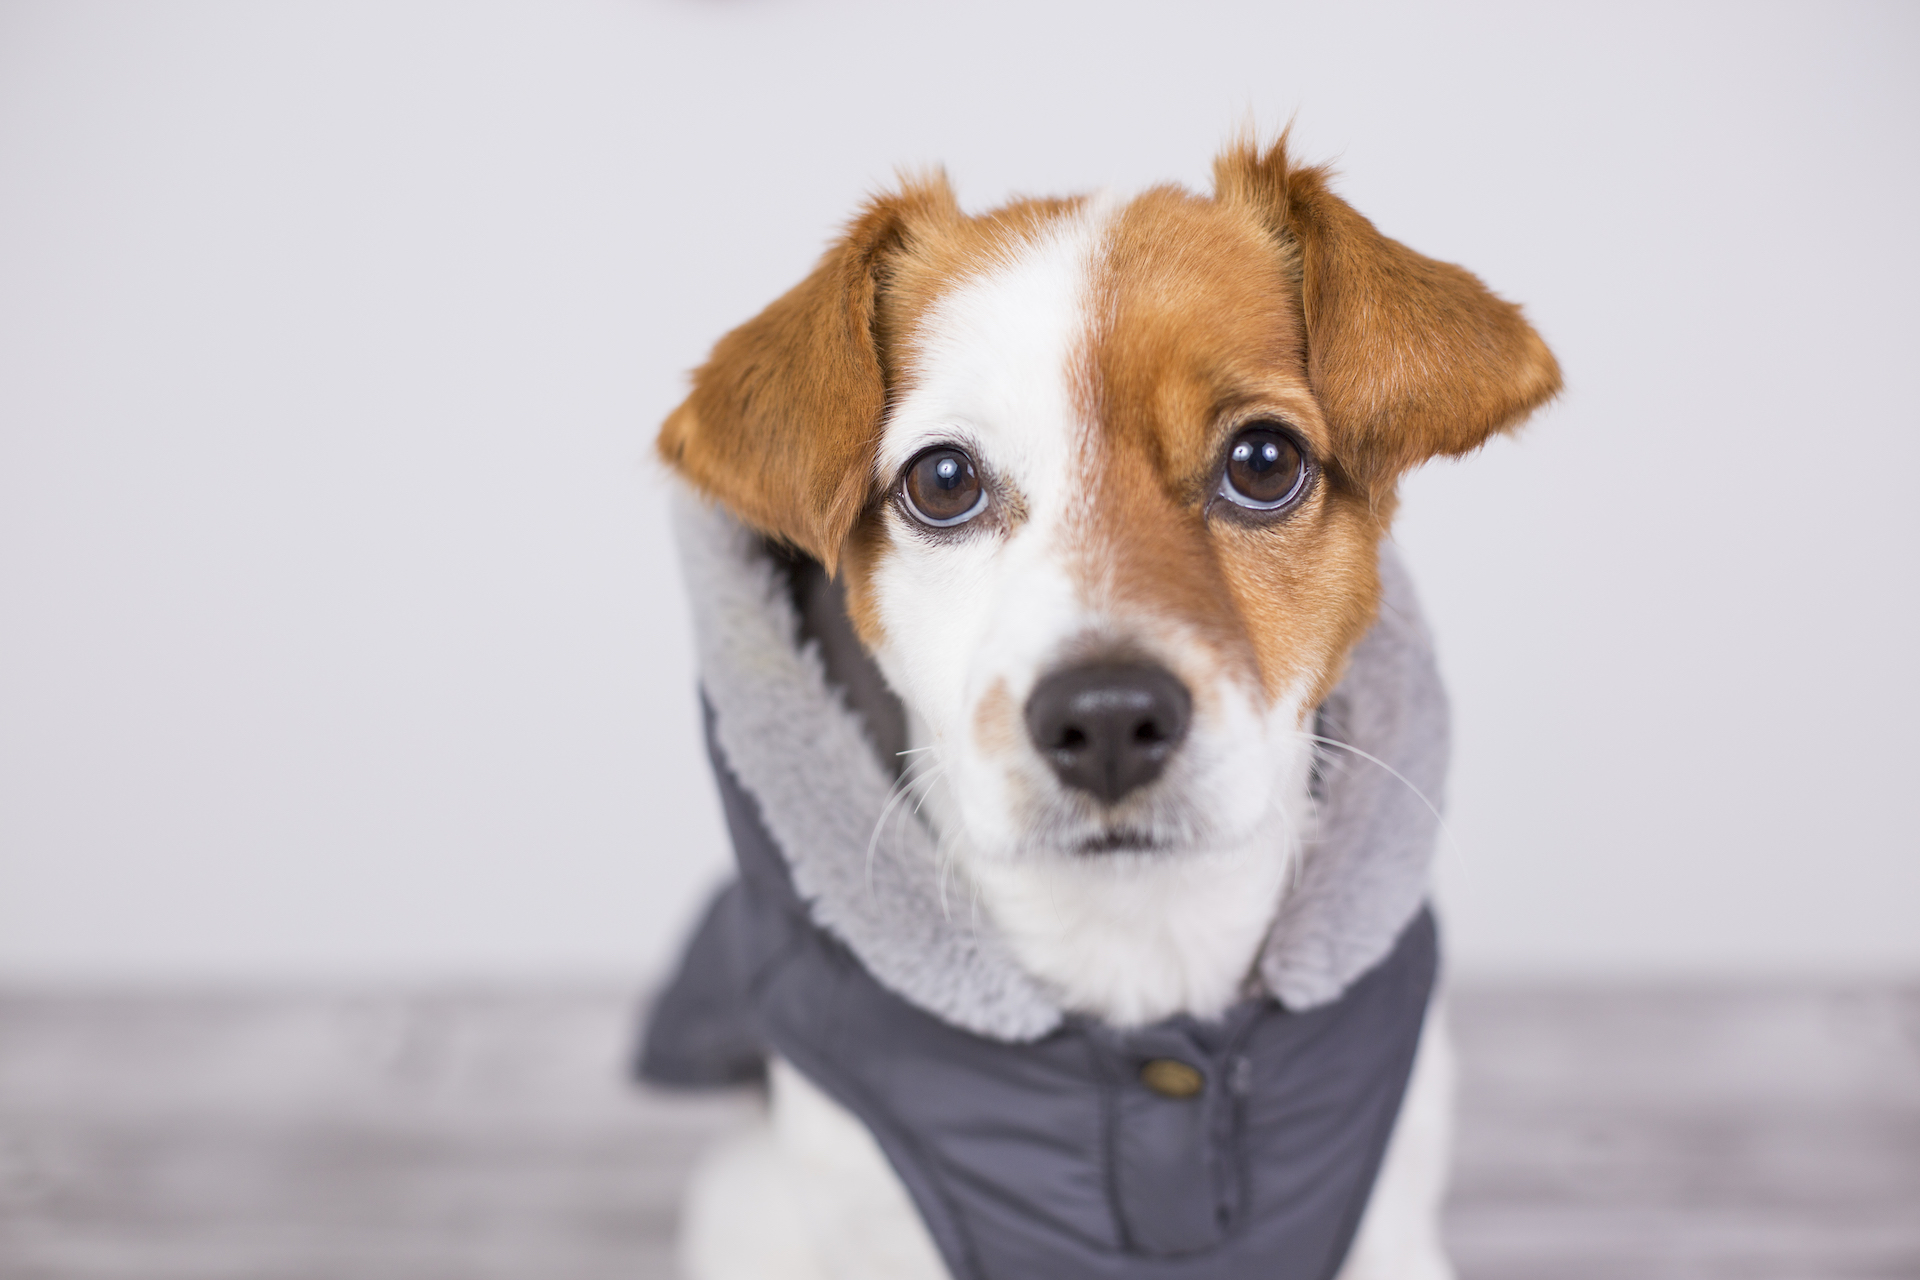 Dog coats: should your dog be wearing one in winter?